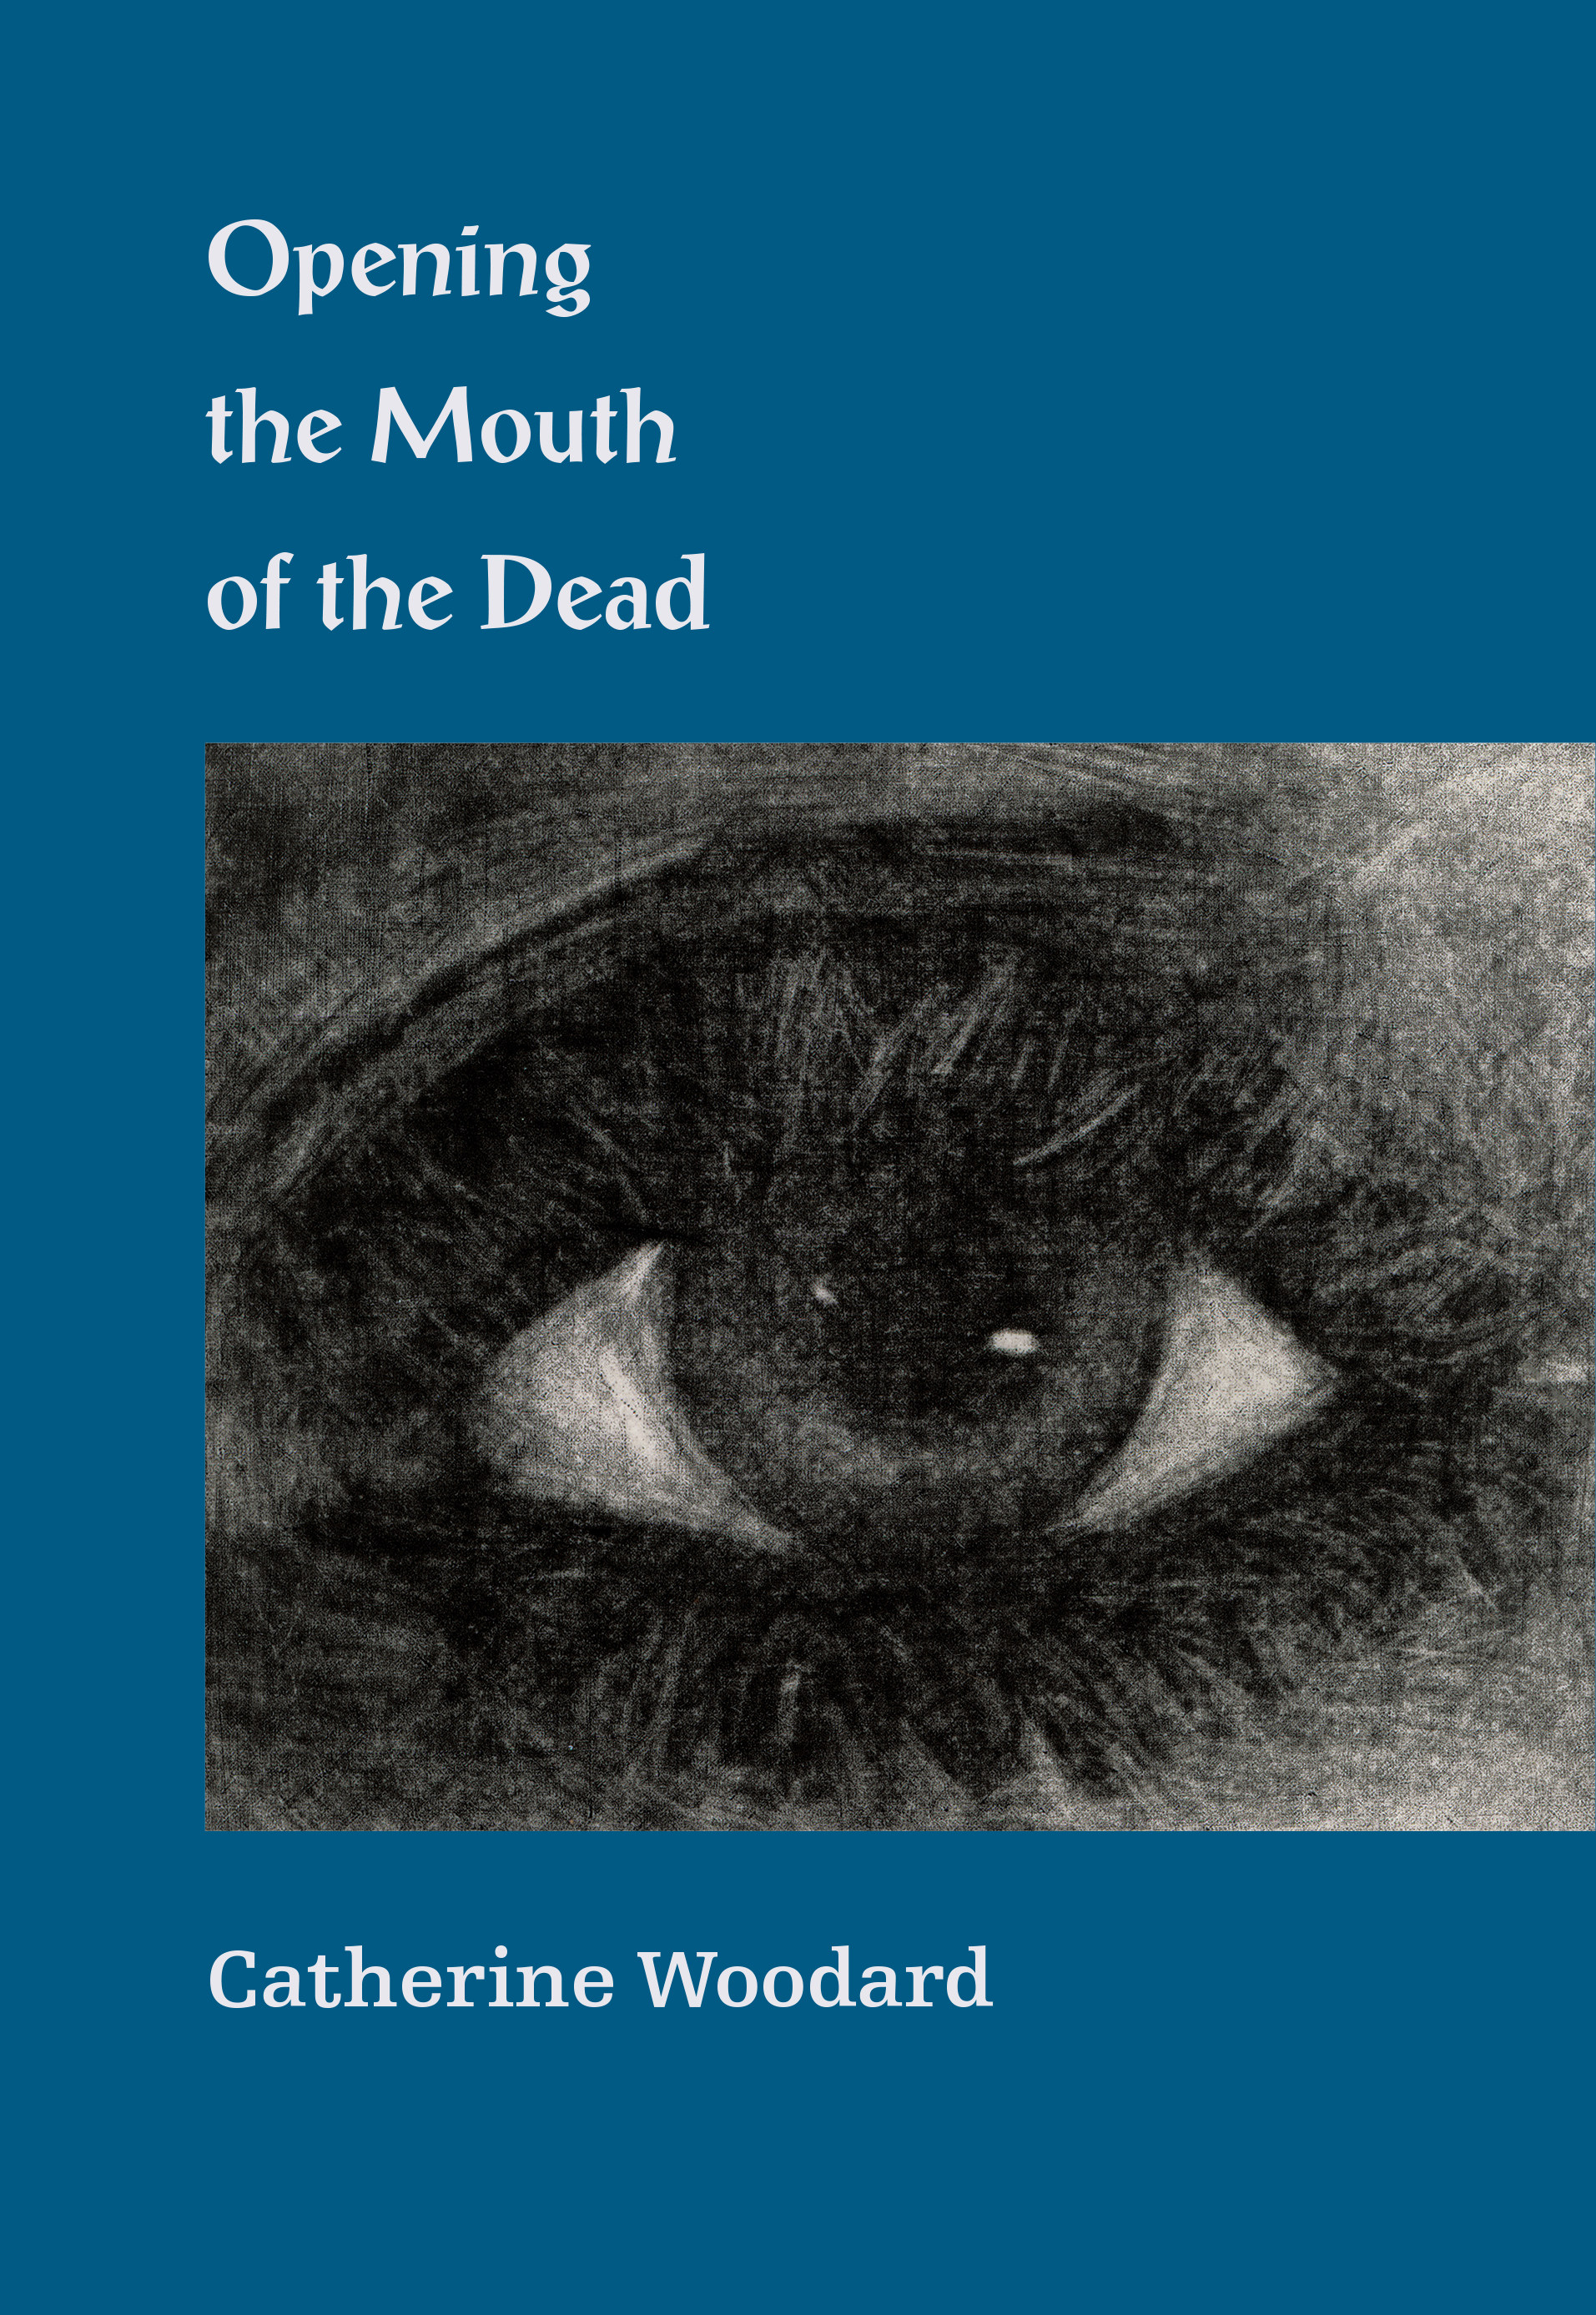 Opening the Mouth of the Dead